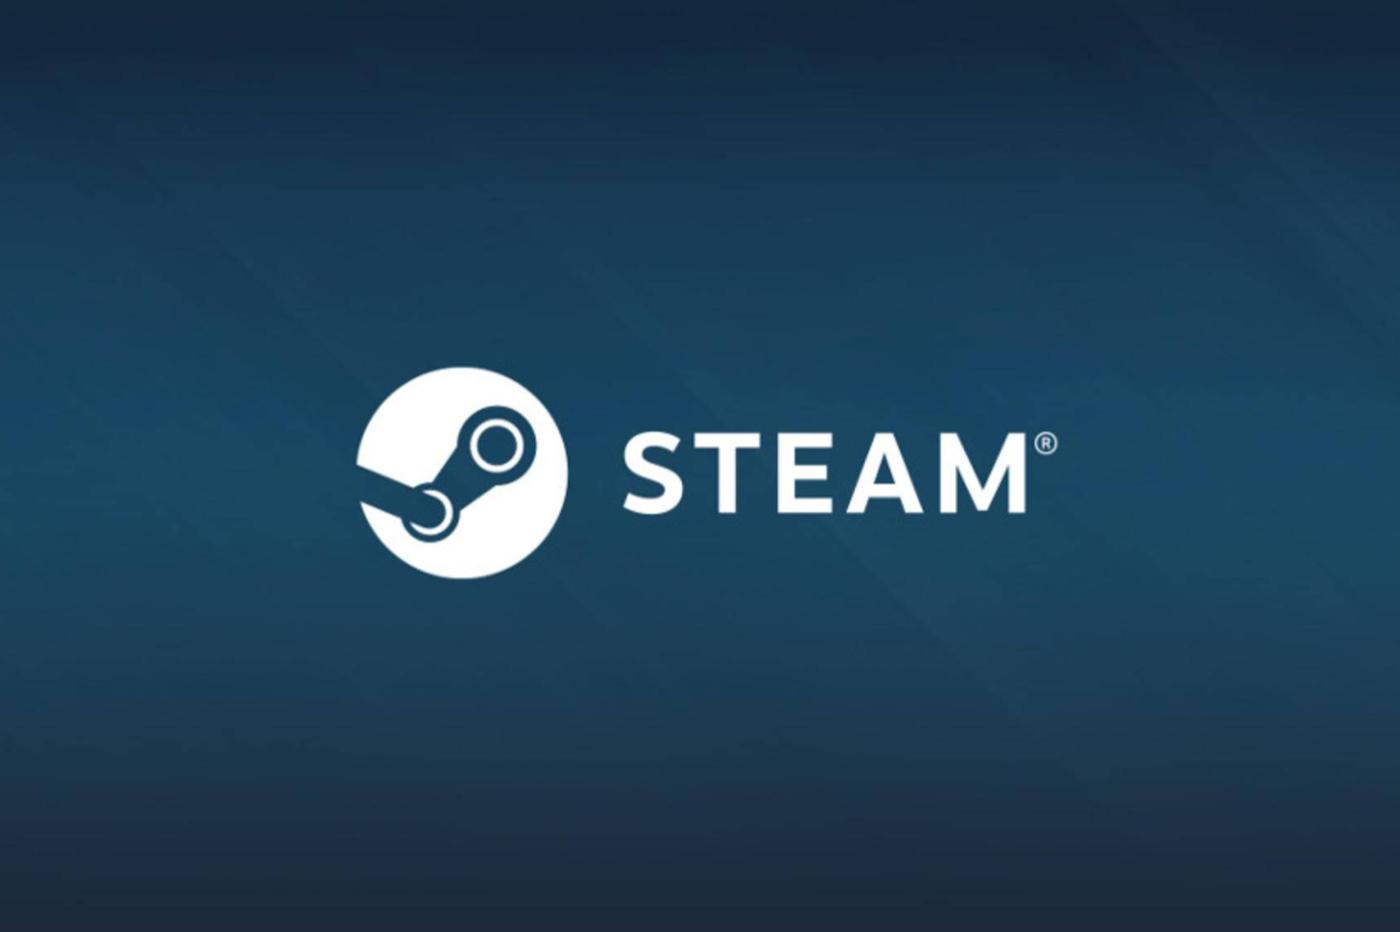 STEAM FREE PC GAMING DOWNLOADER SOFTWARE DOWNLOAD HERE